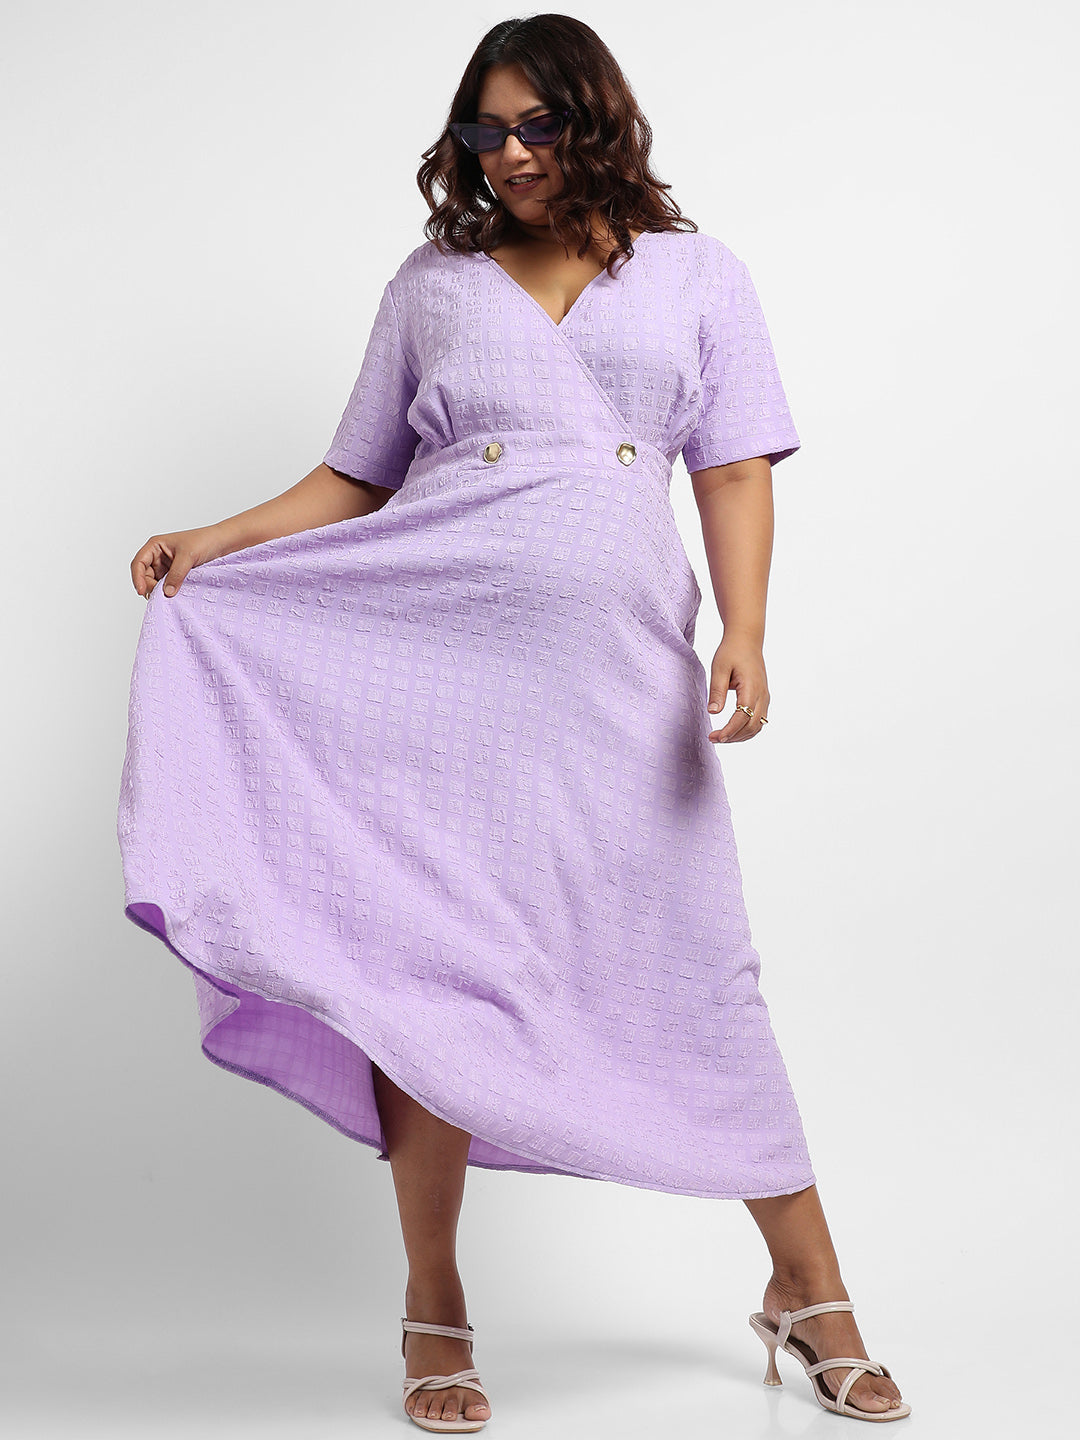 Buy Plus Size Clothing 4x Online In India -  India